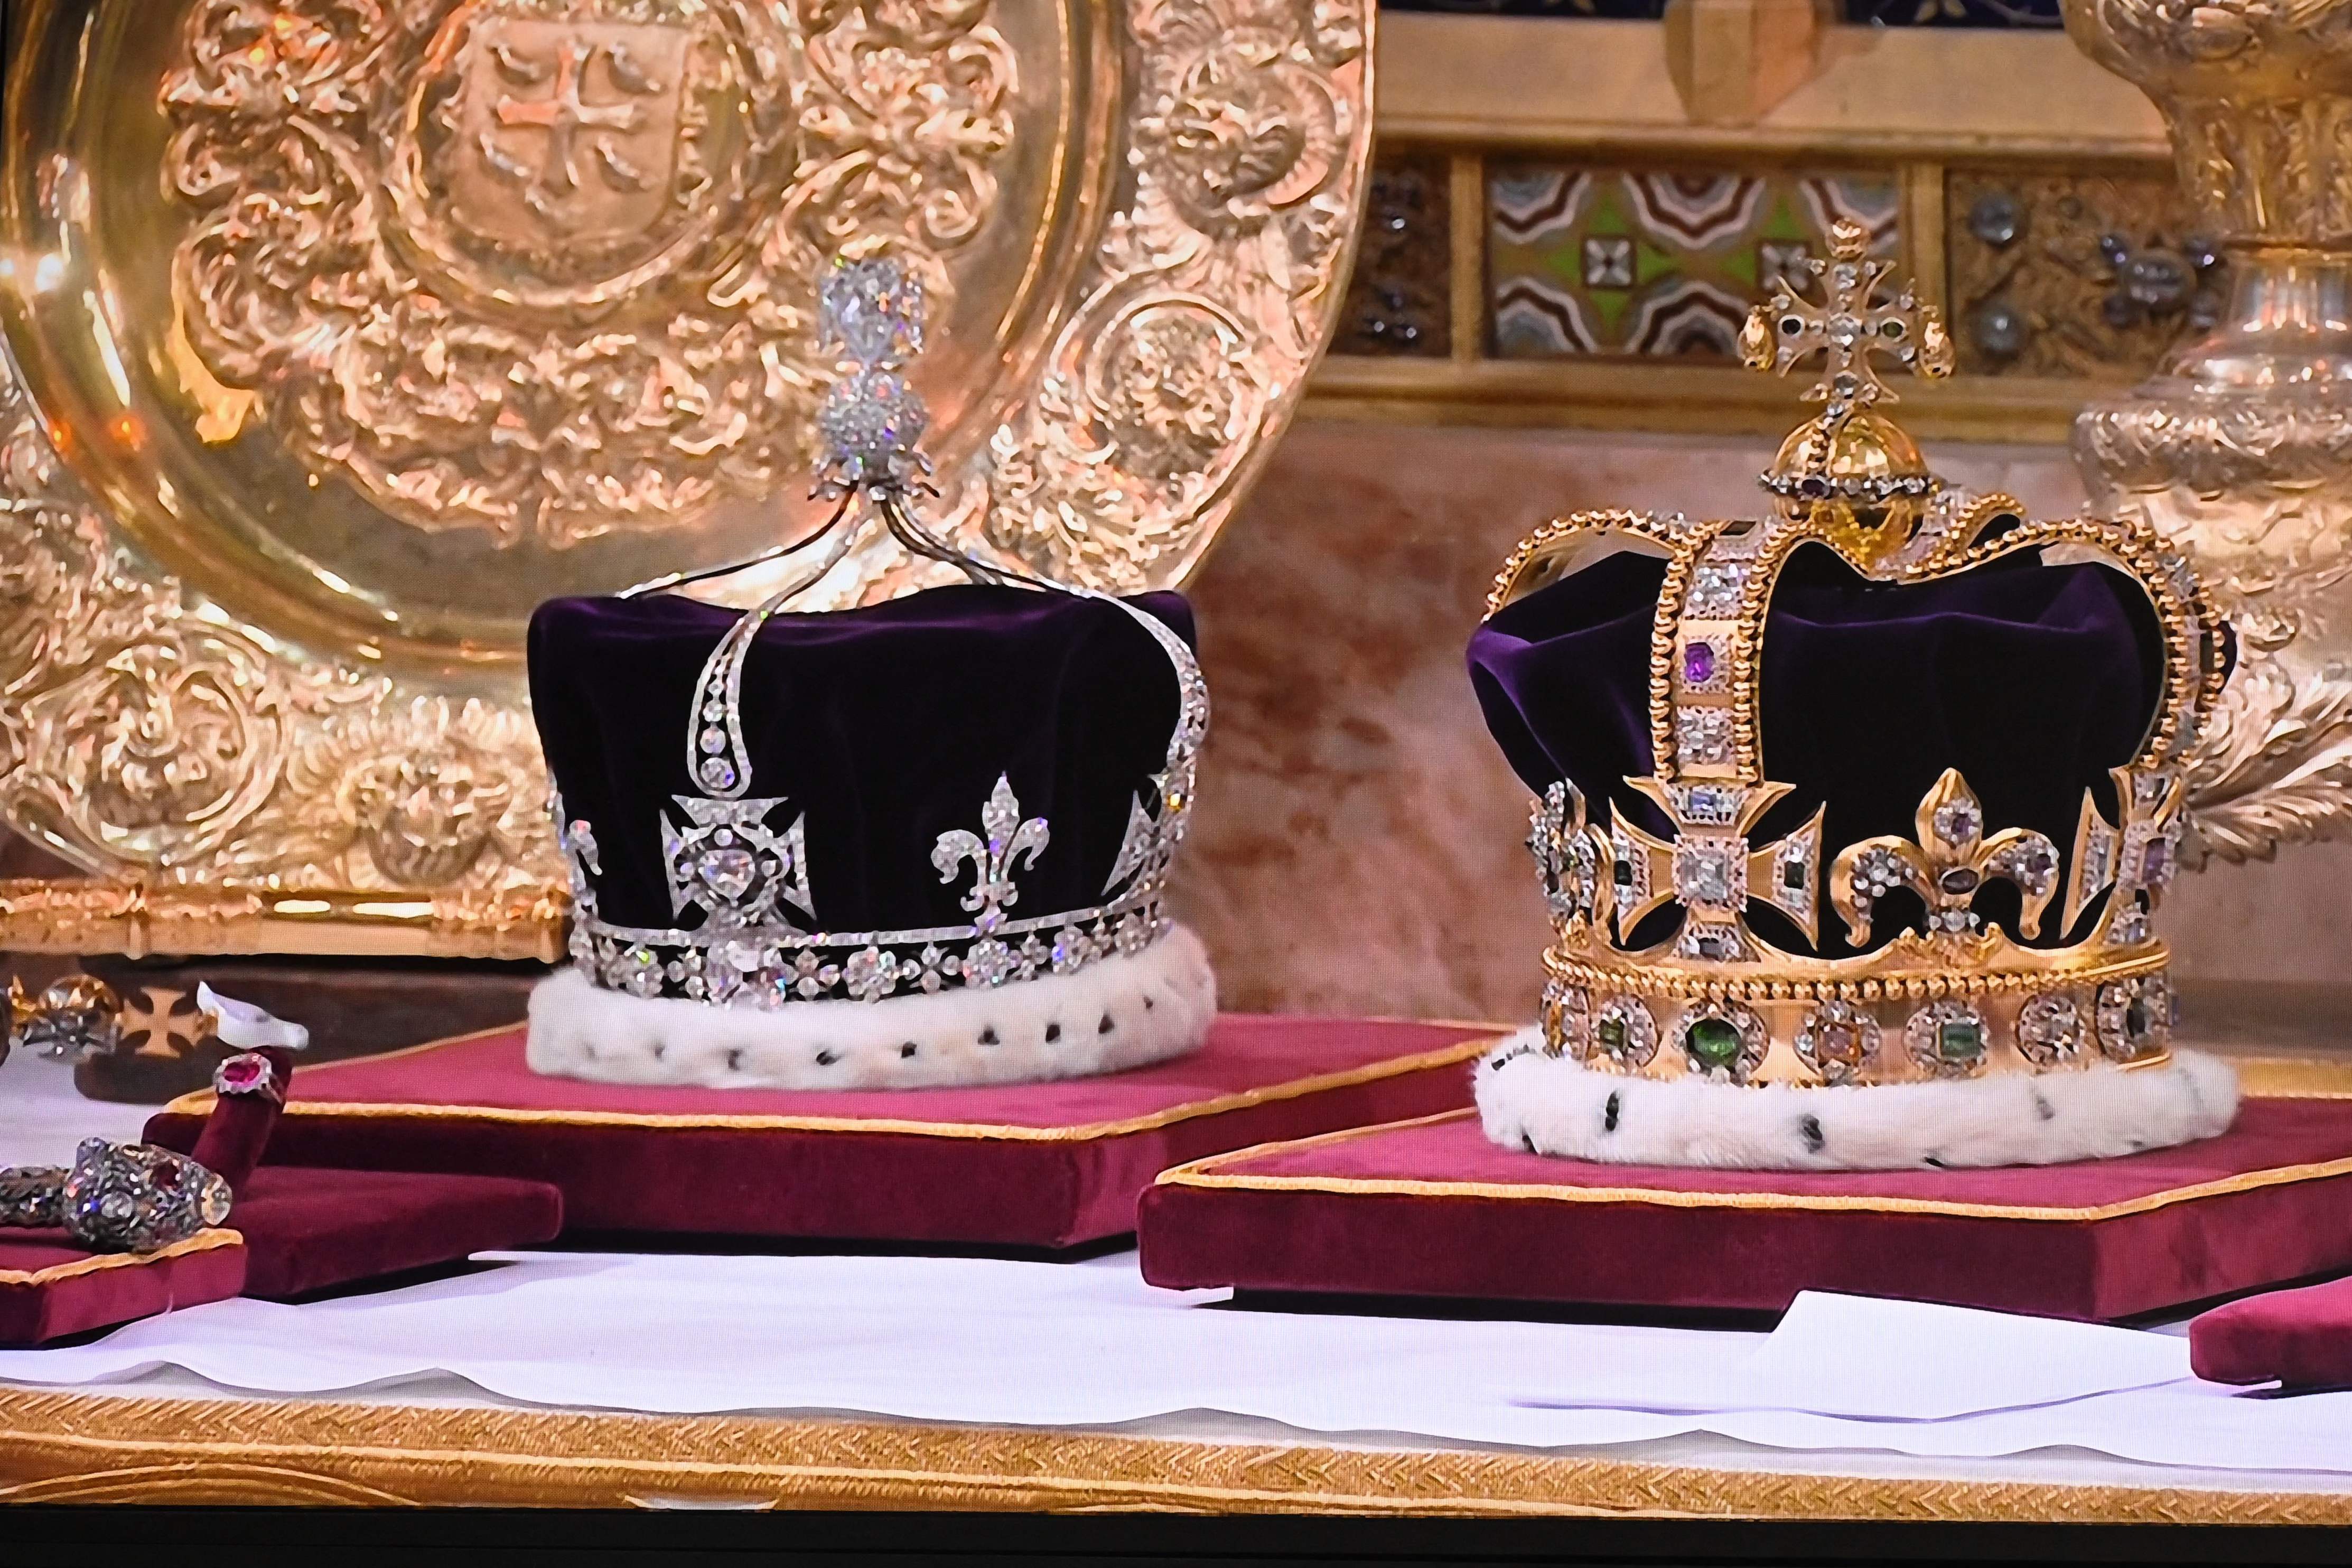 King Charles' 360-year-old crown (right) is over 30cm long and weighs over two kilograms, while Queen Camilla's crown is on the other side.